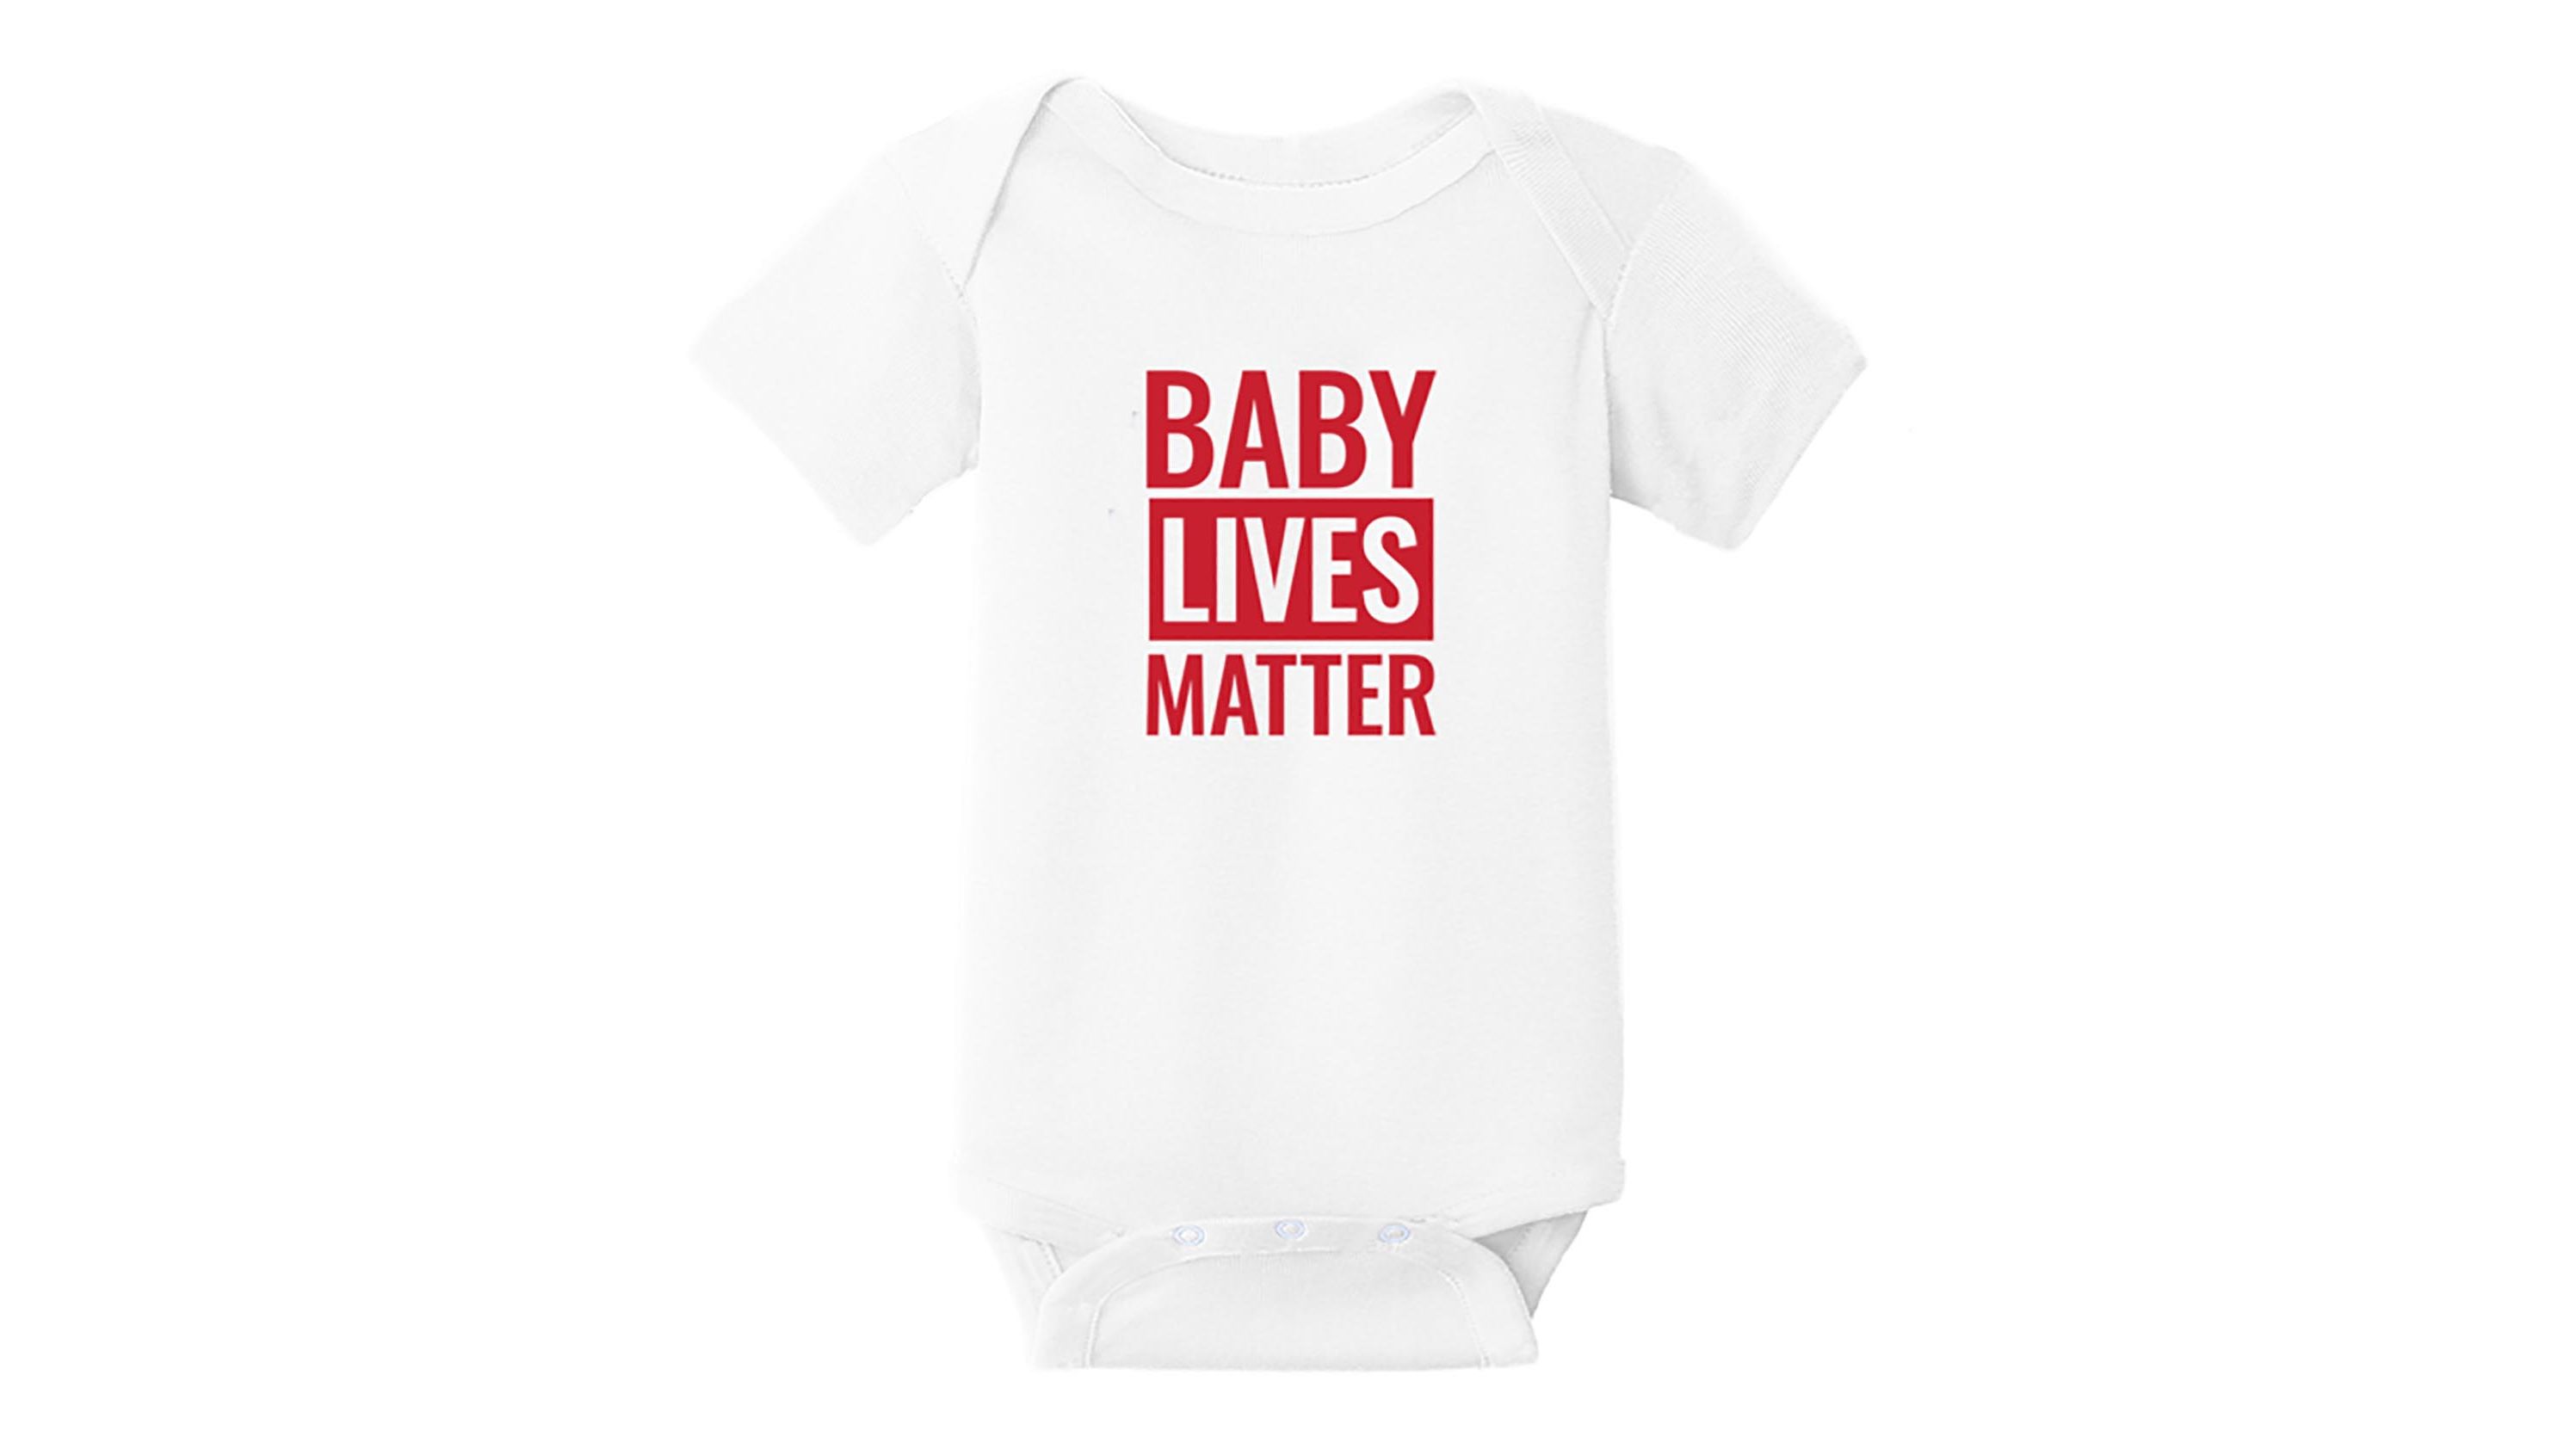 The "Baby Lives Matter" onesies are designed to highlight the President's support for the anti-abortion movement.